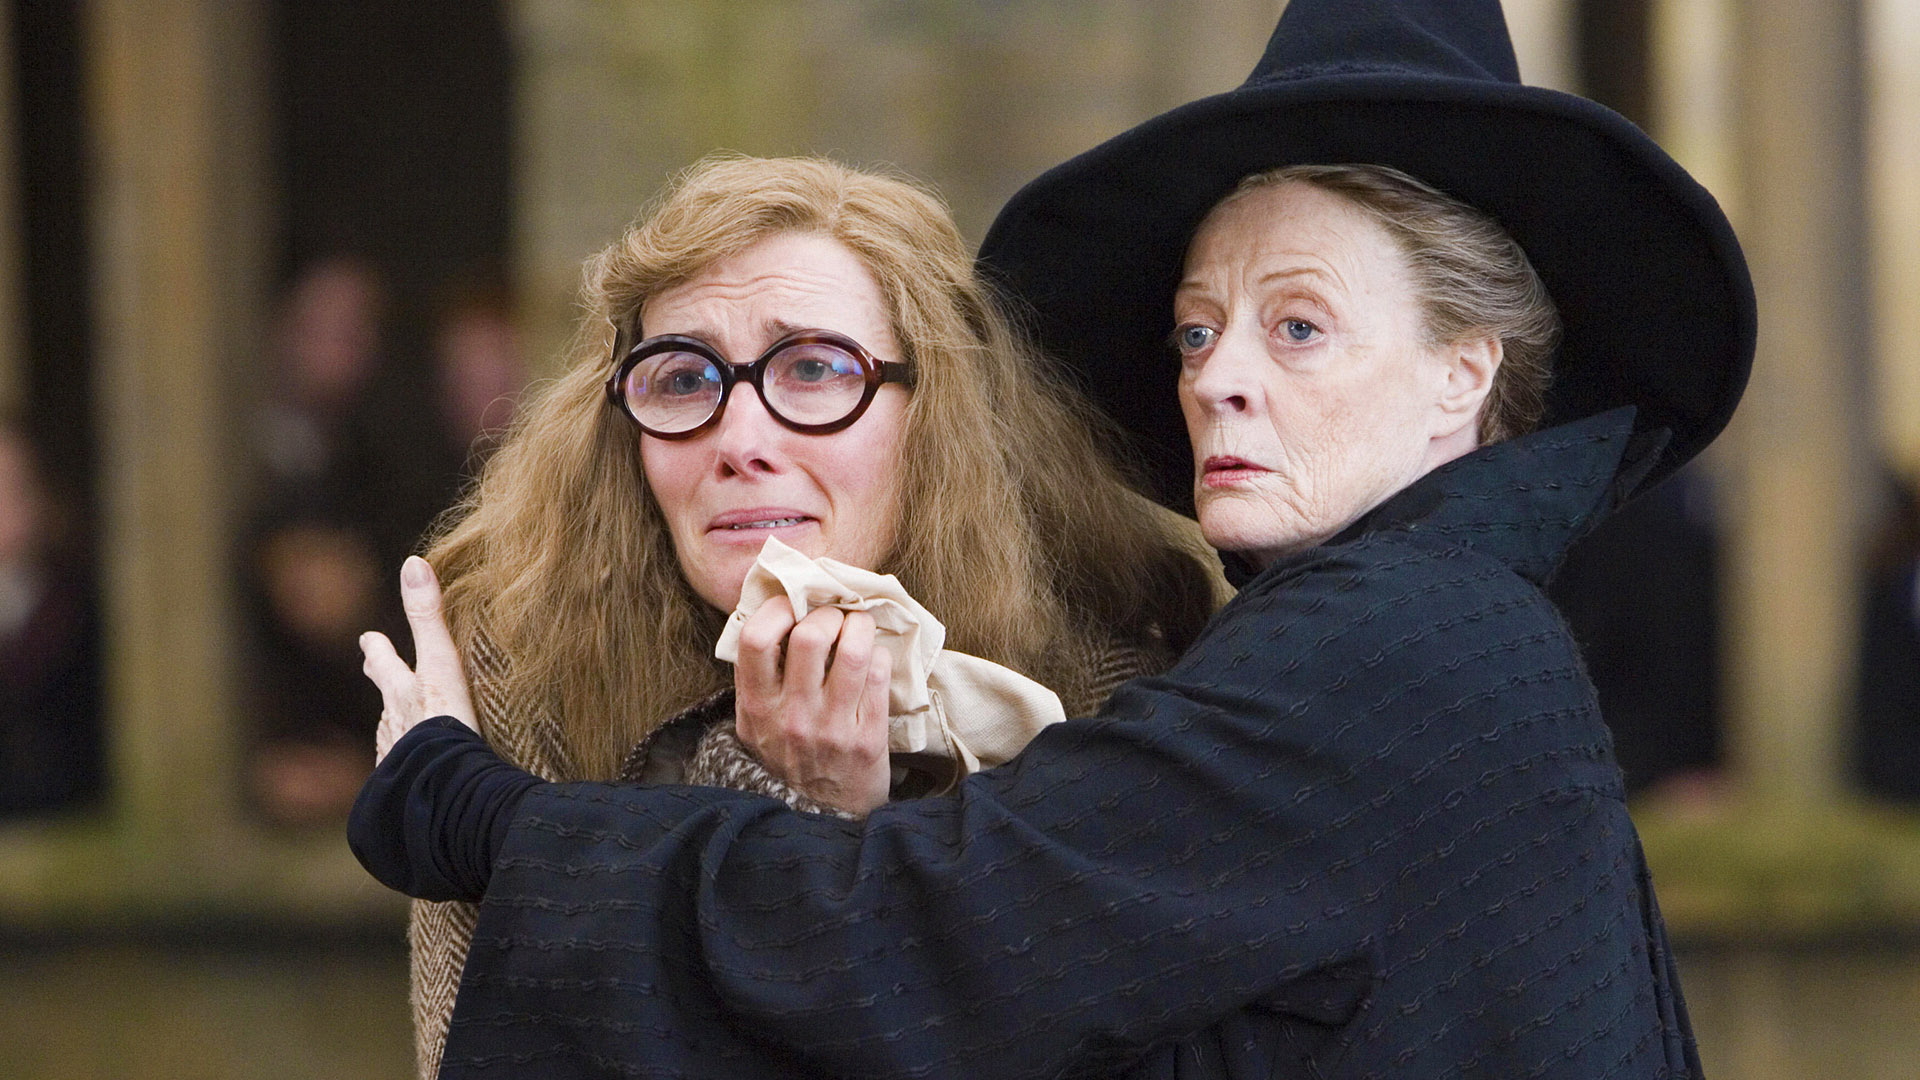 5 Most Useless Professors at Hogwarts (And Why They Should Be Fired)